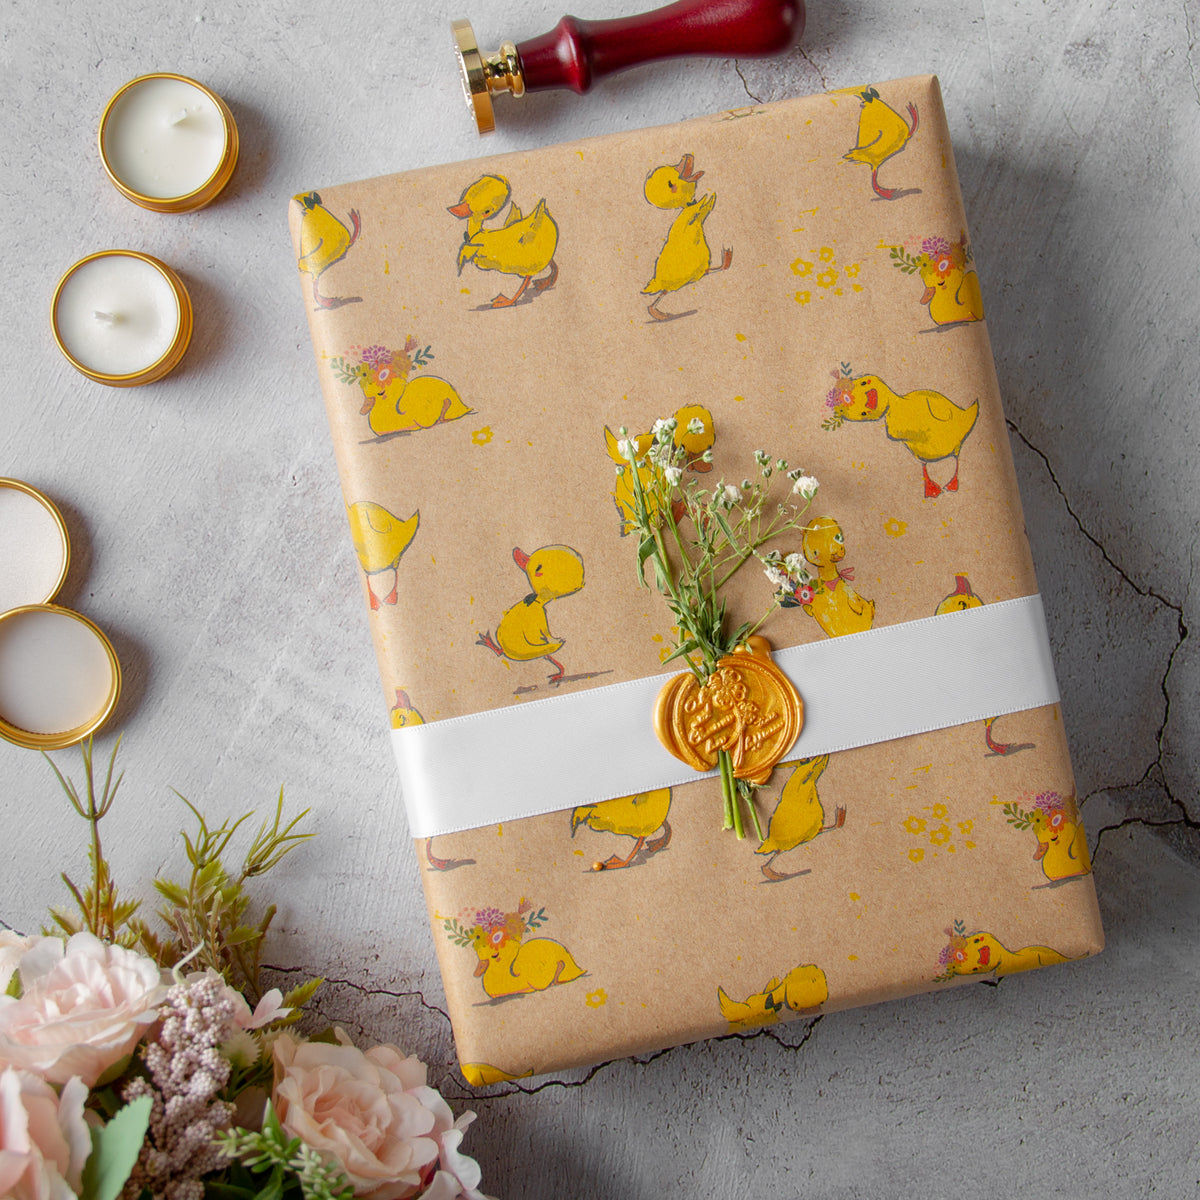 Winnie the Pooh Gift Wrap - Winnie the Pooh wrapping paper 2 Sheets, 2 tag